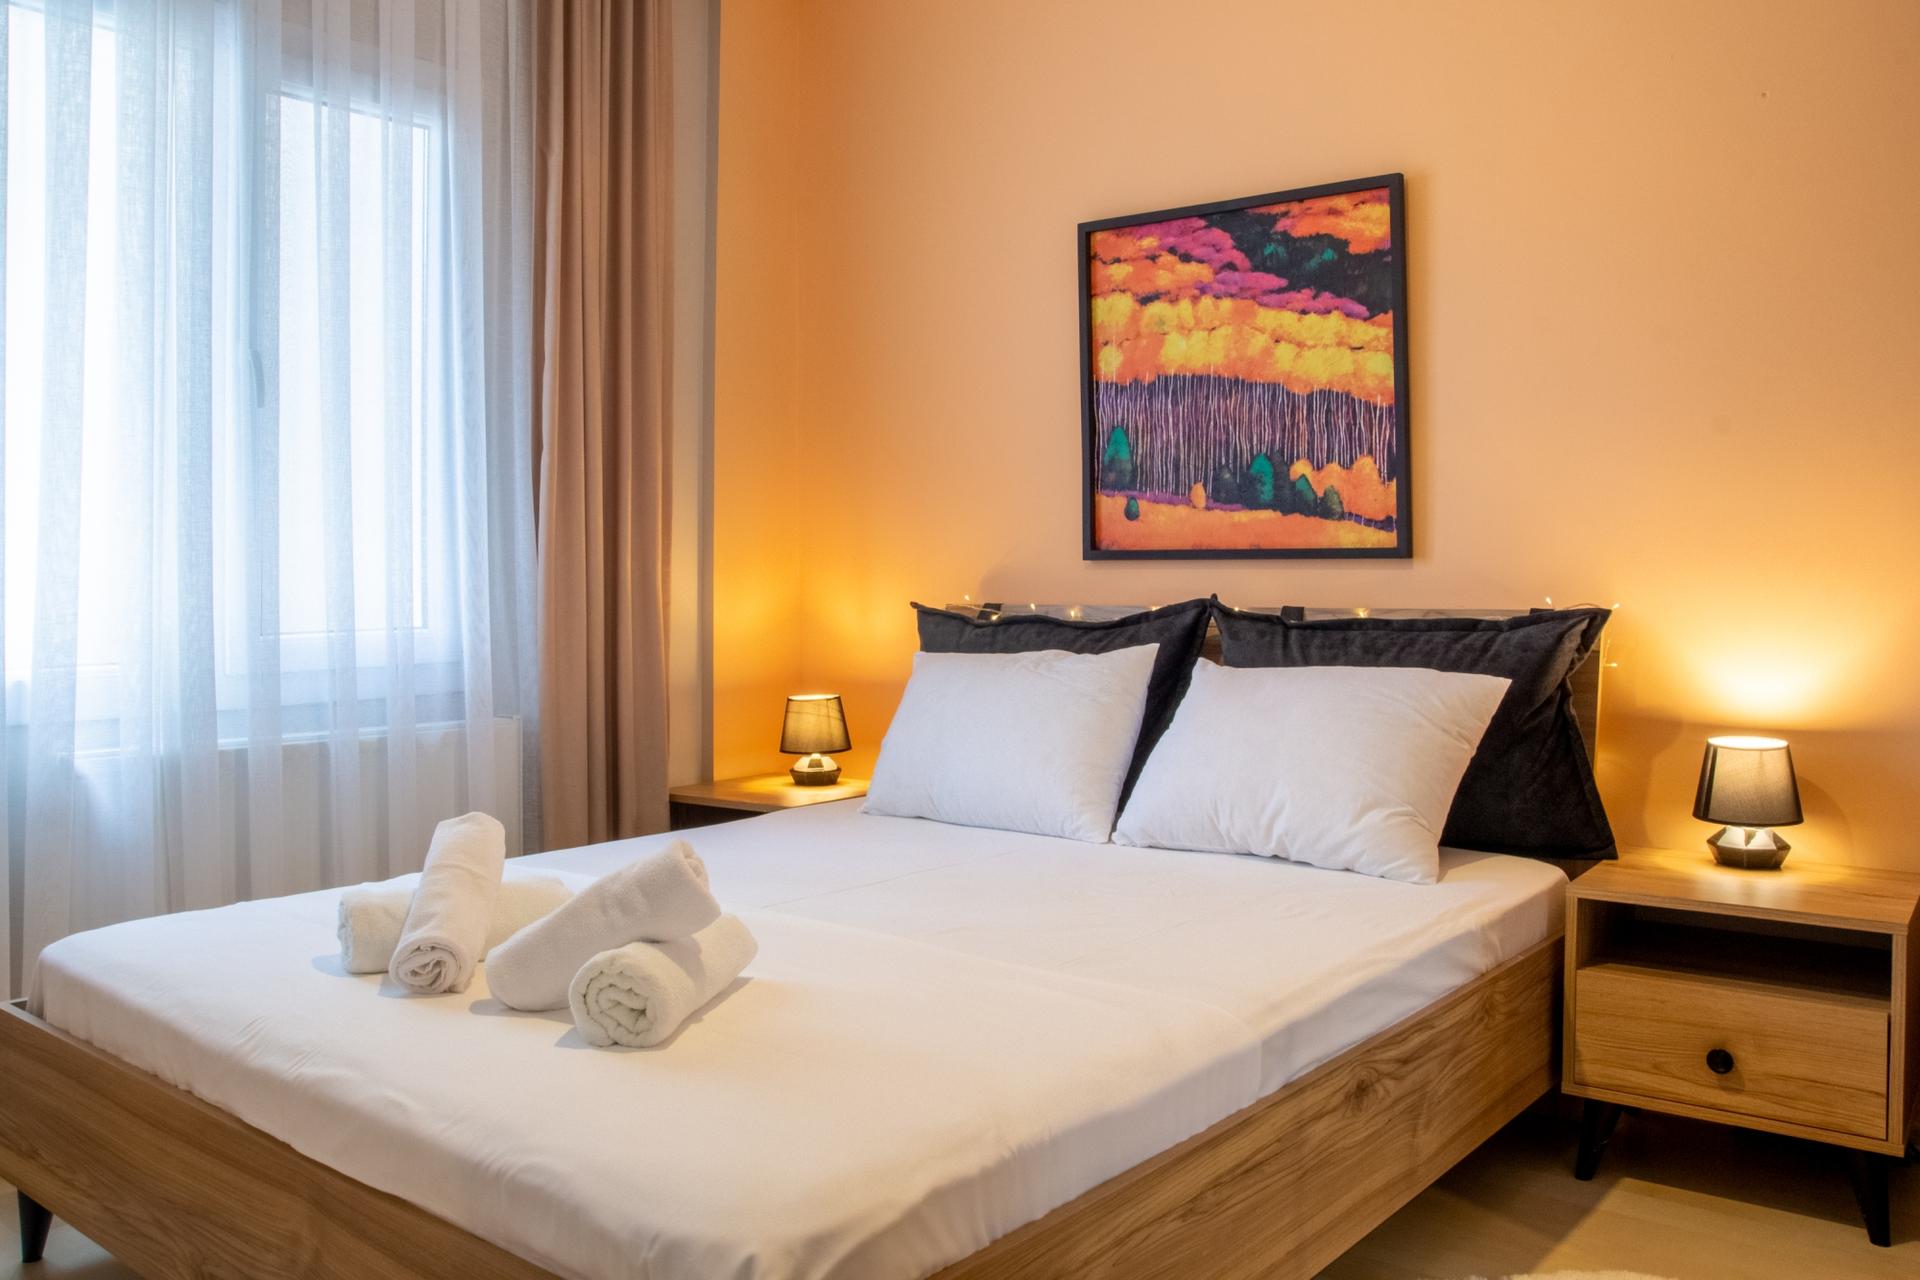 The main bedroom features a cozy double bed and decorative objects to enhance your comfort and relaxation.